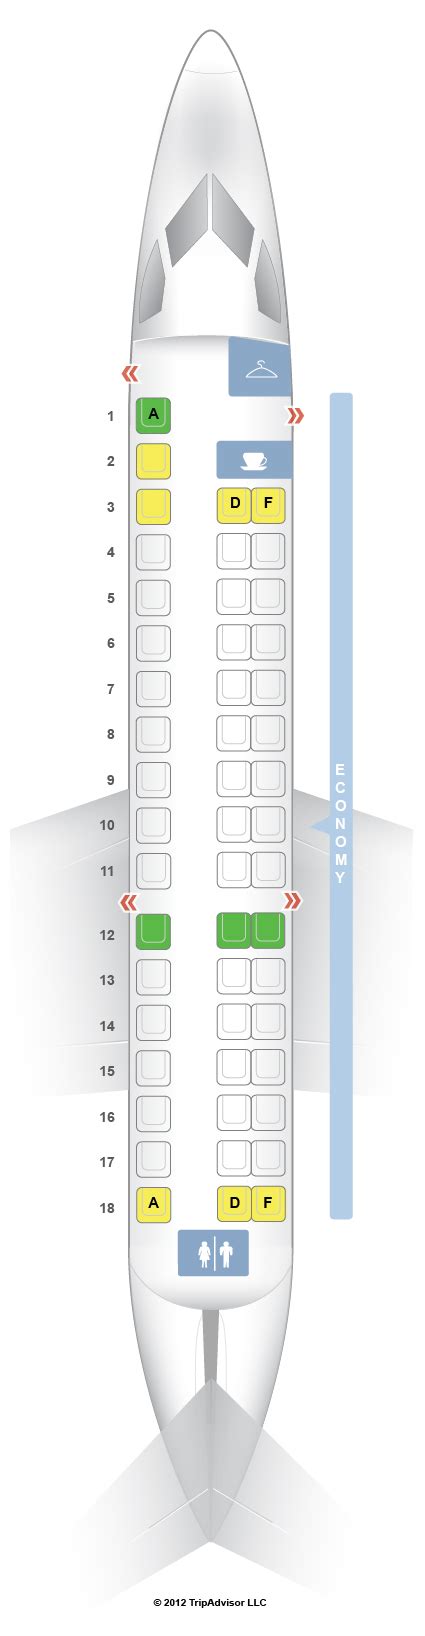 For your next American Airlines flight, use this seating chart to get the most comfortable seats, legroom, and recline on . Seat Maps; Airlines; Cheap Flights; Comparison Charts. Short-haul Economy Class ... Embraer ERJ-145 (ER4) Embraer ERJ-175 (E75) Layout 1; Embraer ERJ-175 (E75) Layout 2; Check-in; Baggage; Infants; Minors; Pets;. 